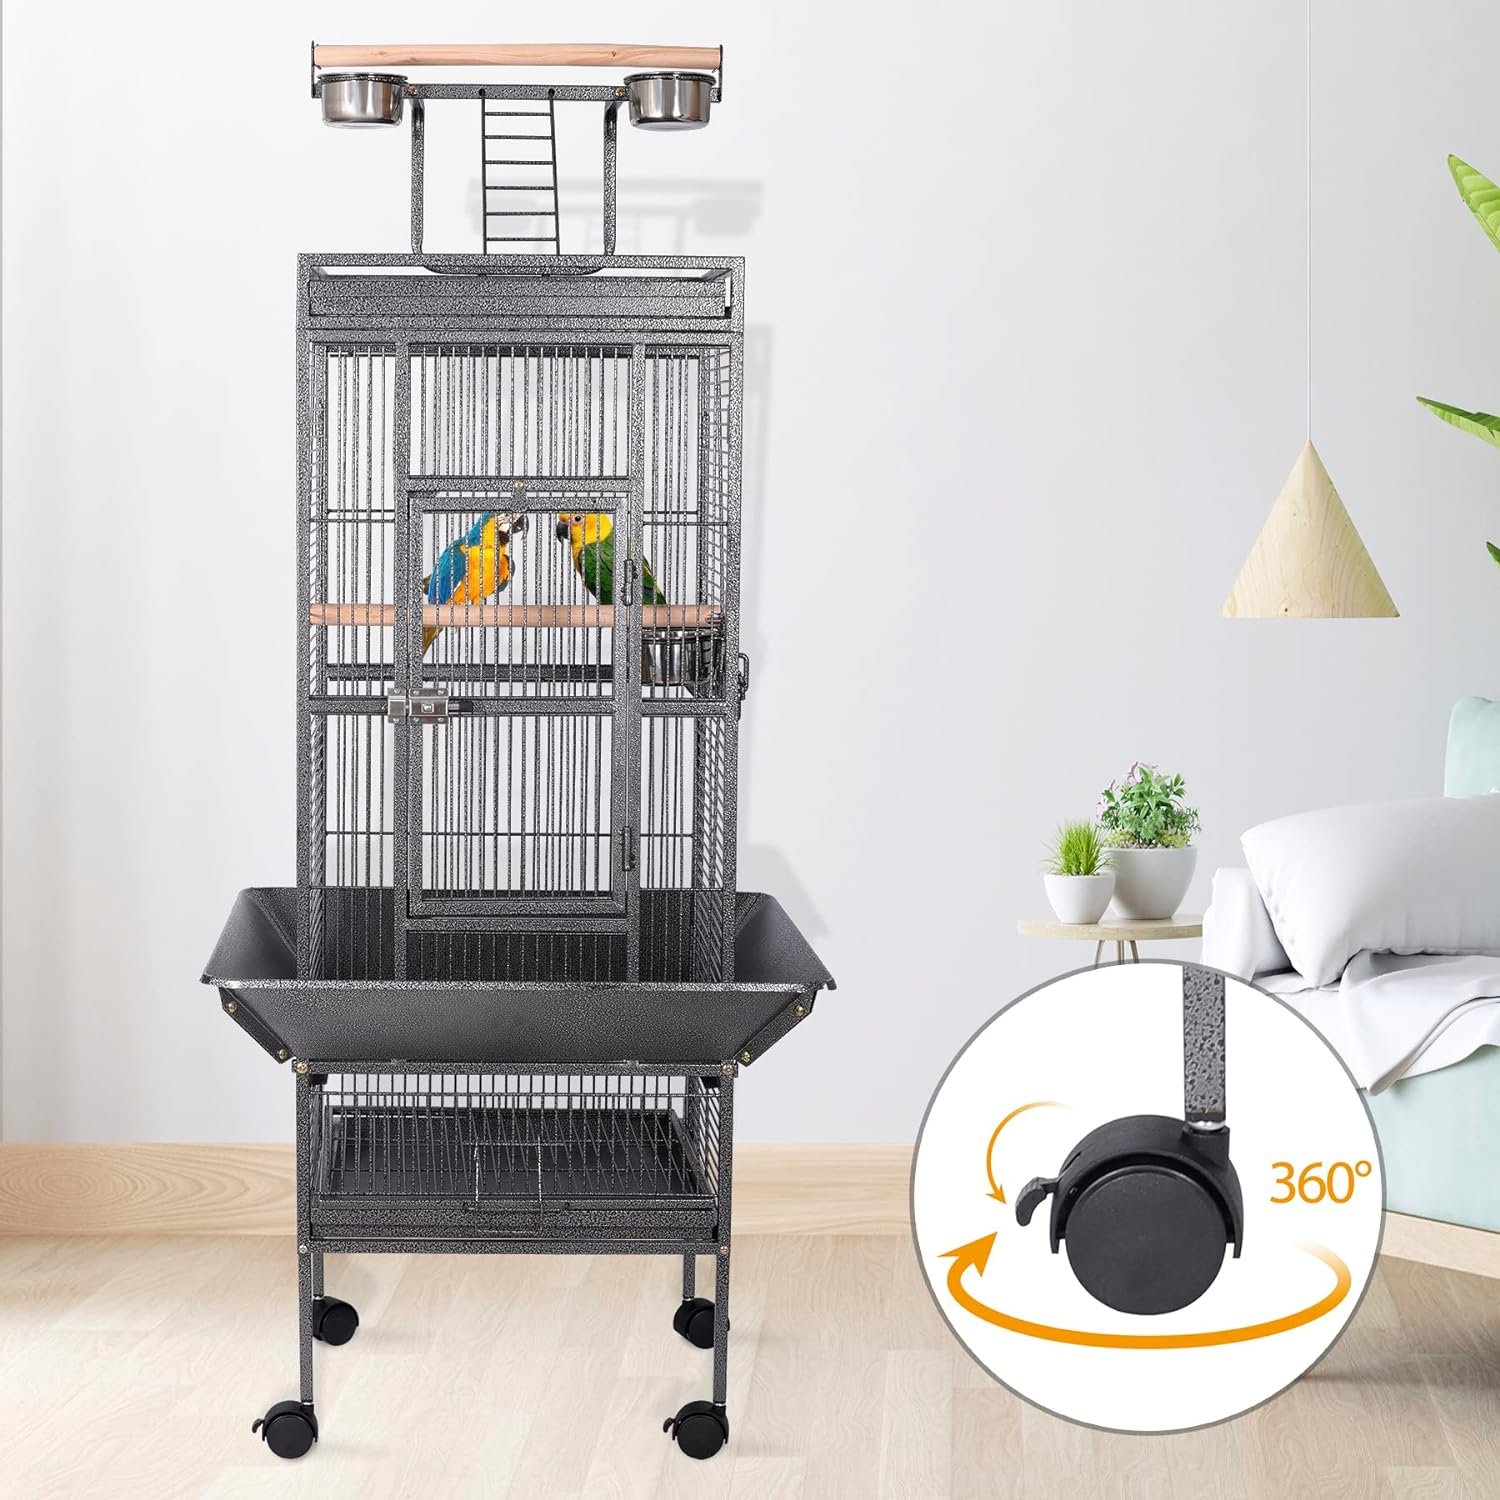 HSM 63 Inch Wrought Iron Large Bird Flight Cage with Rolling Stand for African Grey Parrot Cockatiel Sun Parakeet Conure Lovebird Canary…